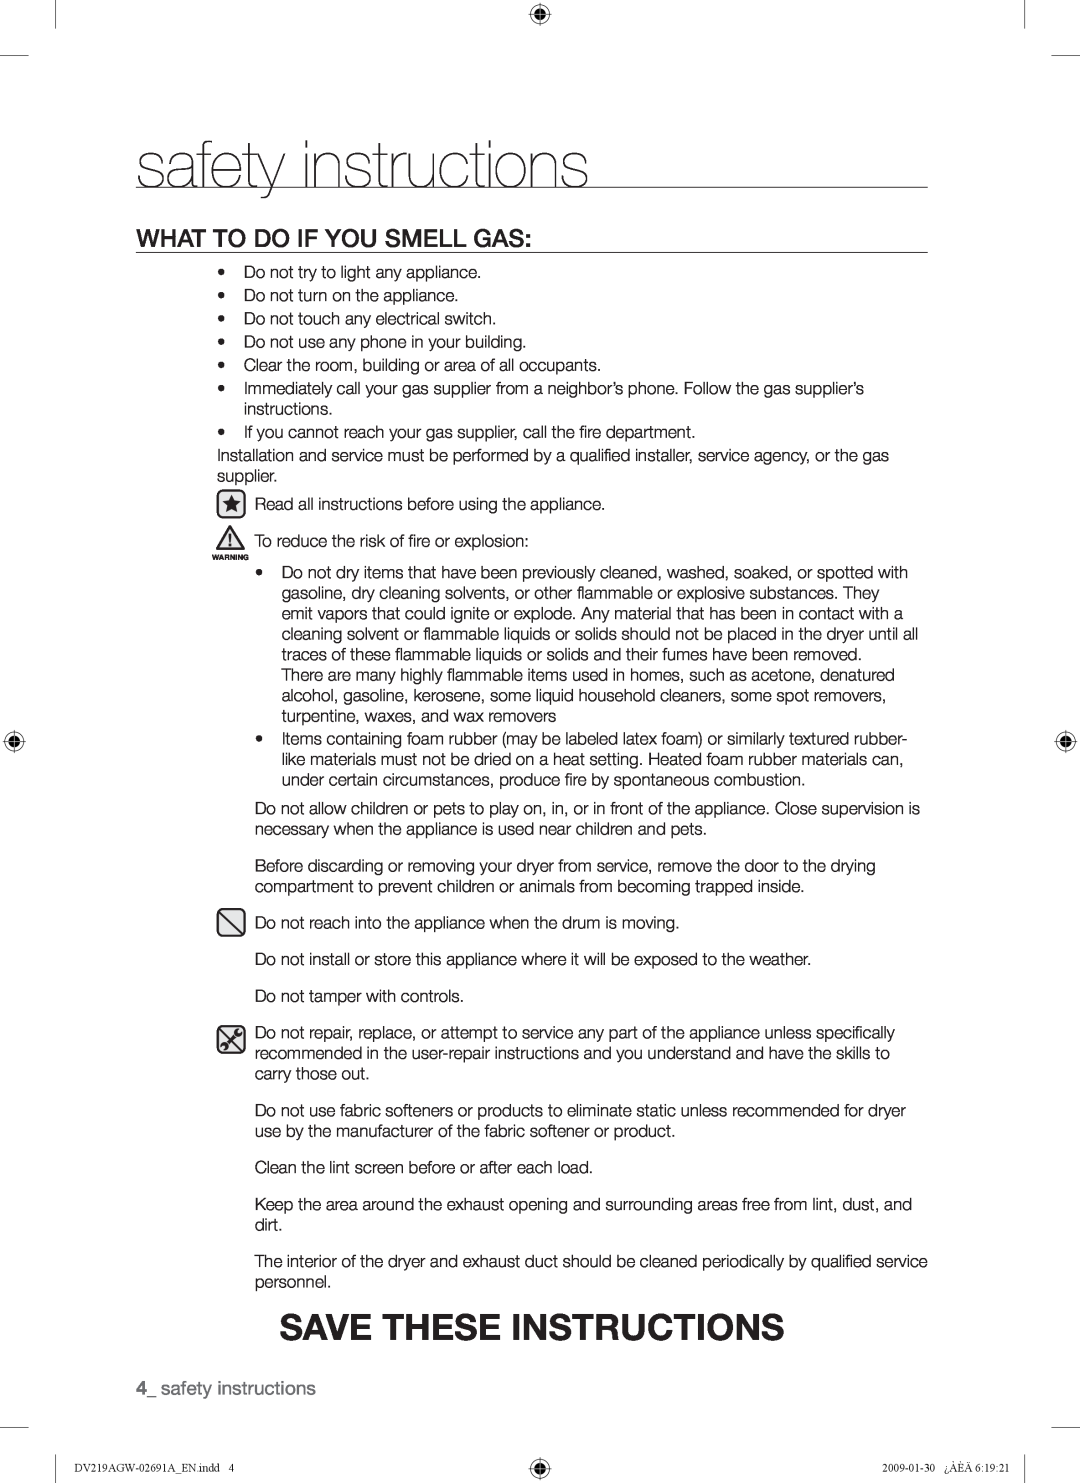 Samsung DV219AGW, DV219AE*, DV219AG* user manual What To Do If You Smell Gas, safety instructions, Save These Instructions 